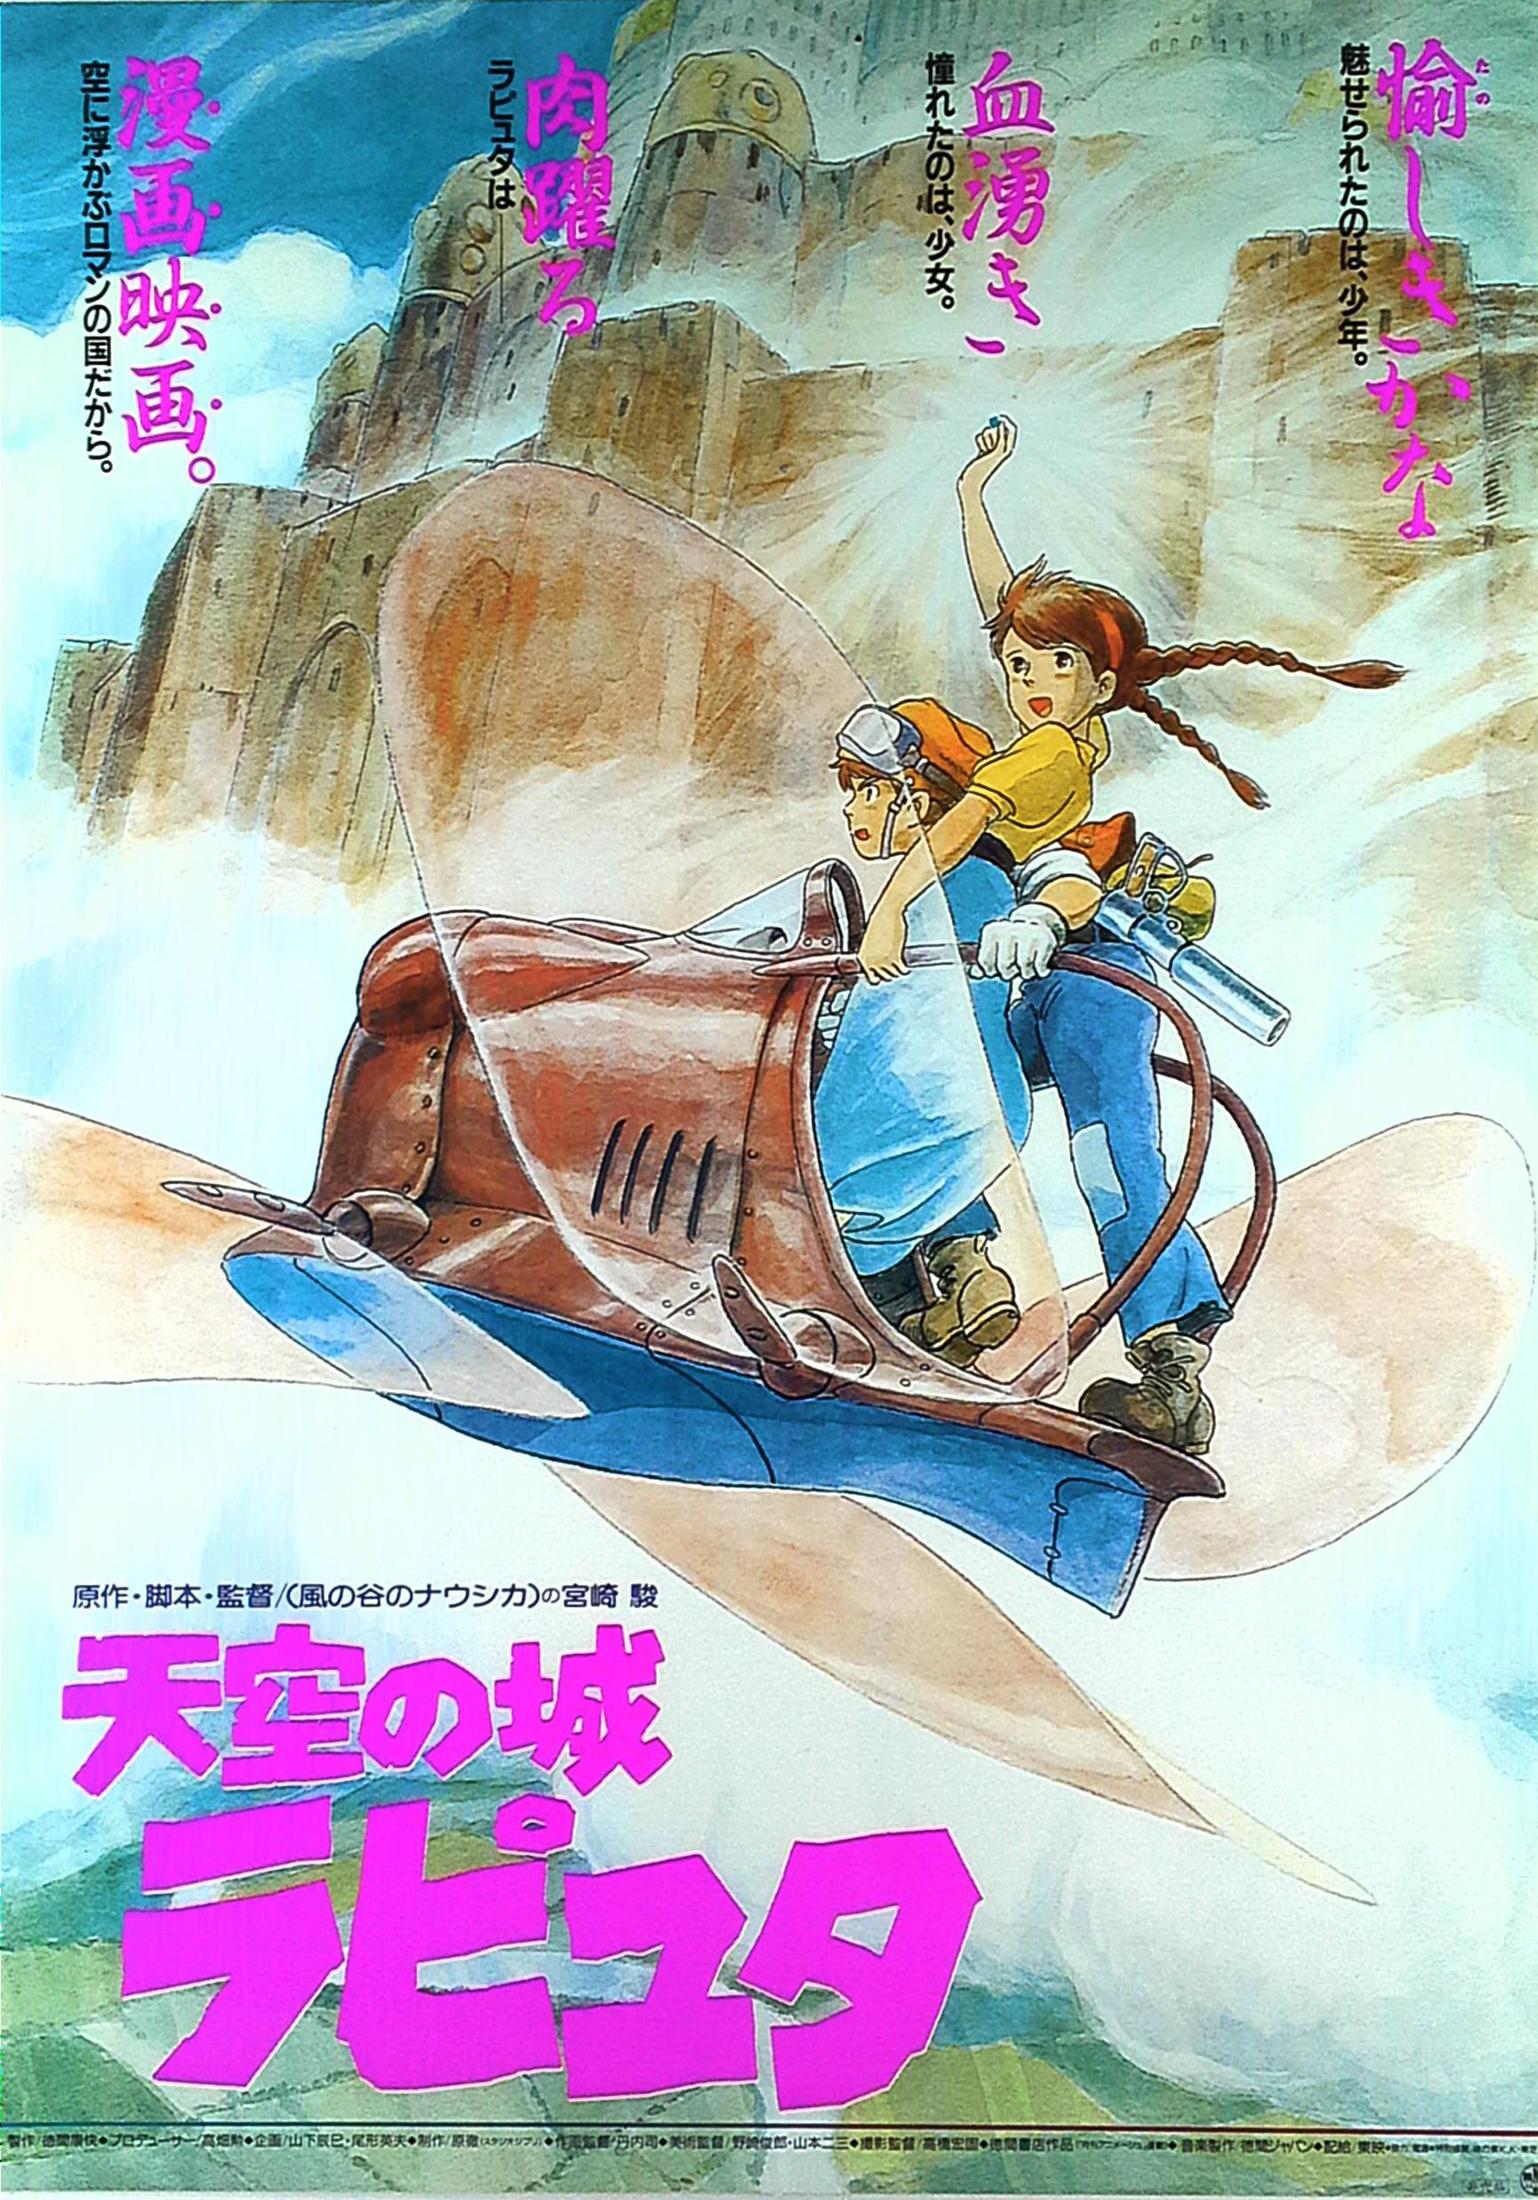 An original vintage poster from Studio Ghibli's 1986 production Laputa: Castle in the Sky, written and directed by the acclaimed Hayao Miyazaki.

Size: B2